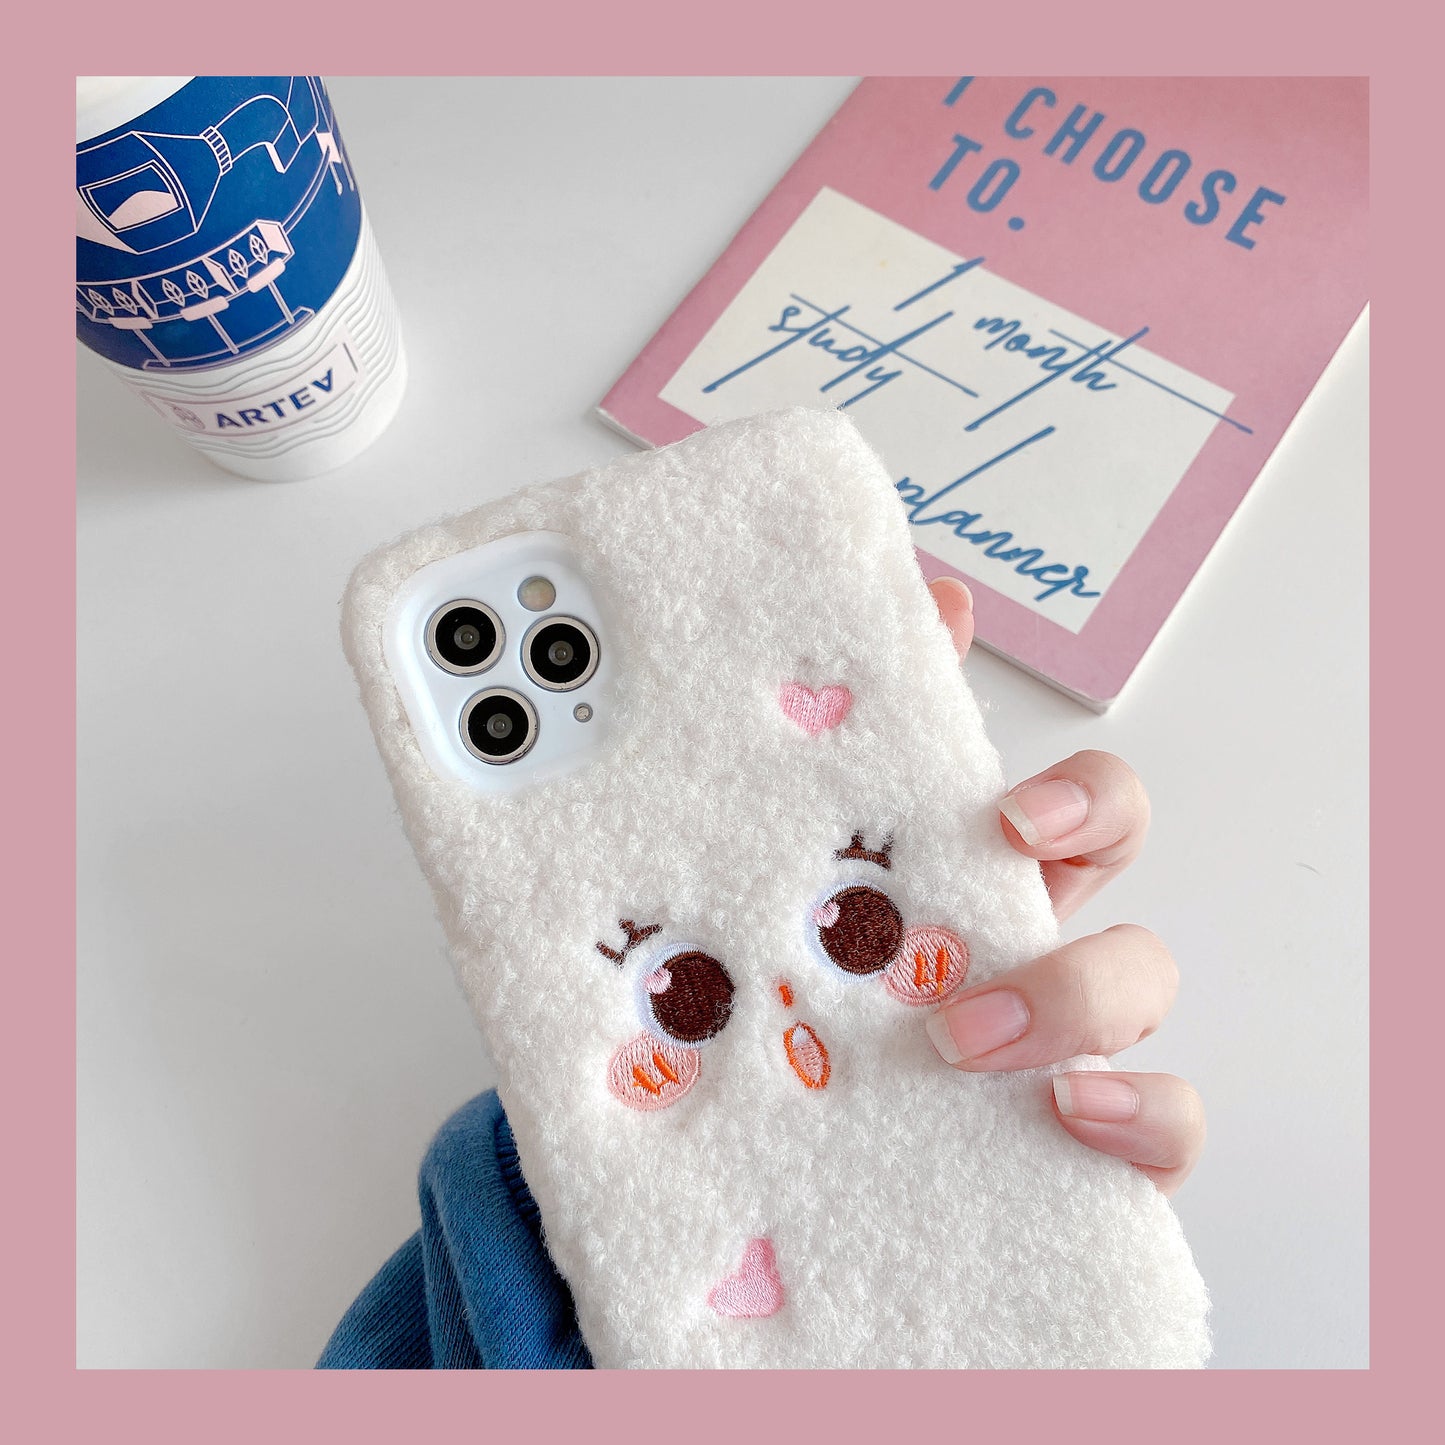 iPhone case,Fluffy,Couple.